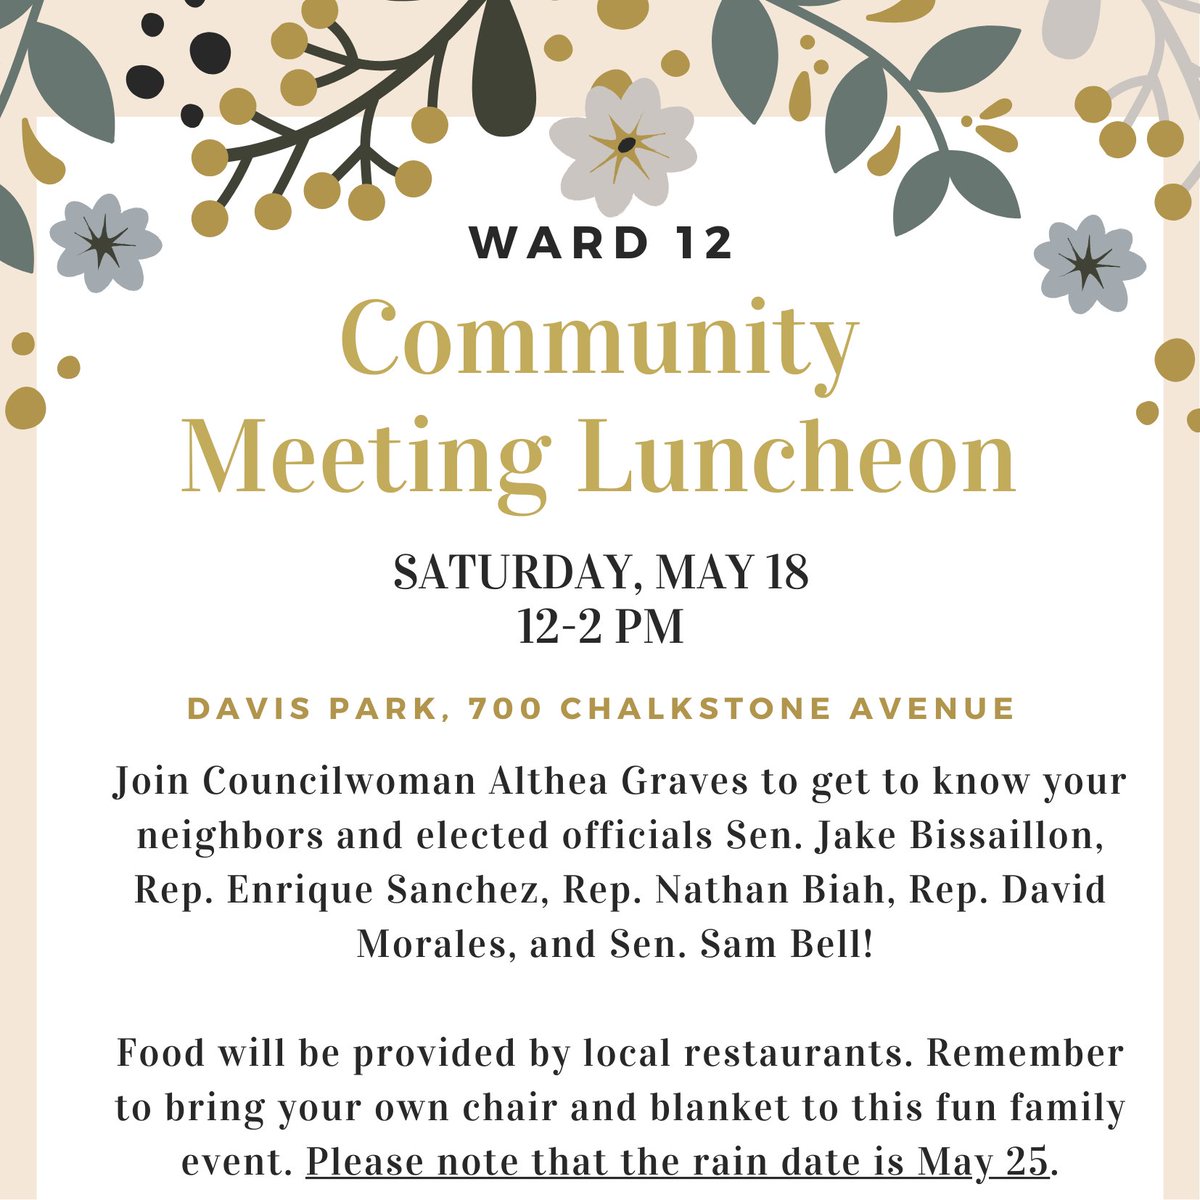 Ward 12: Head over to Davis Park TODAY for a community meeting luncheon! Bring your own chair and blanket to enjoy food and time with the community.